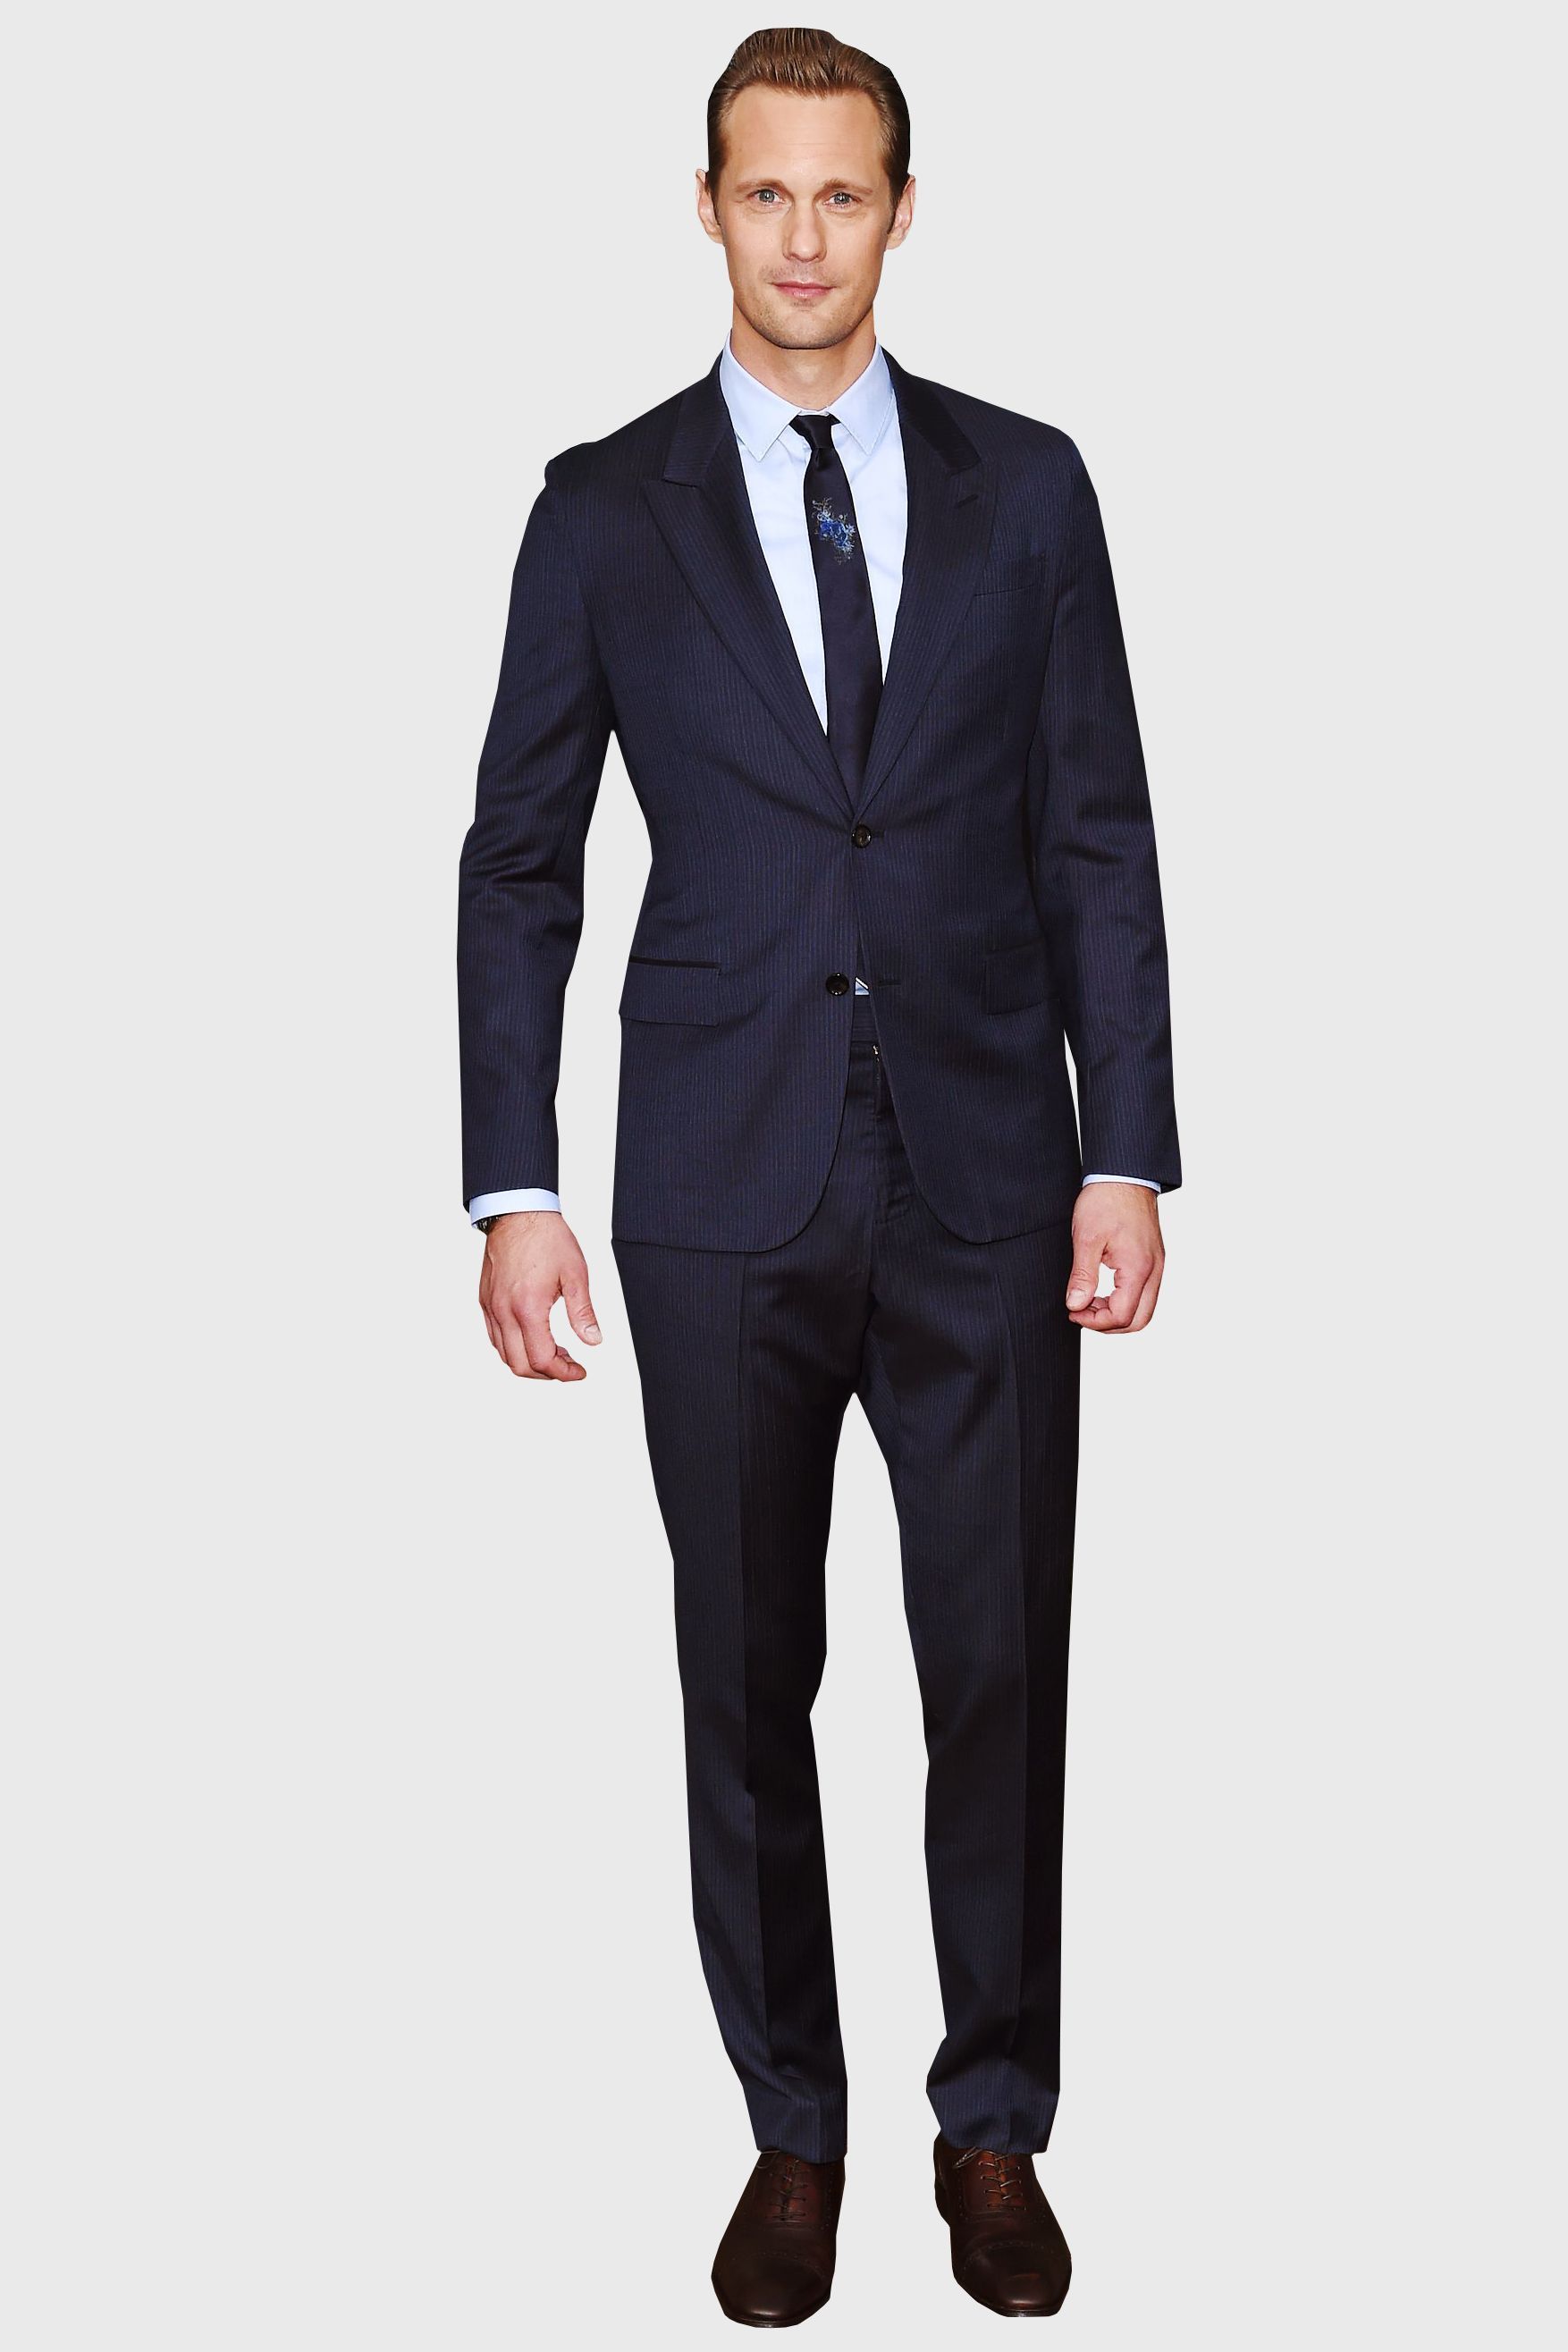 best dress for wedding party for man